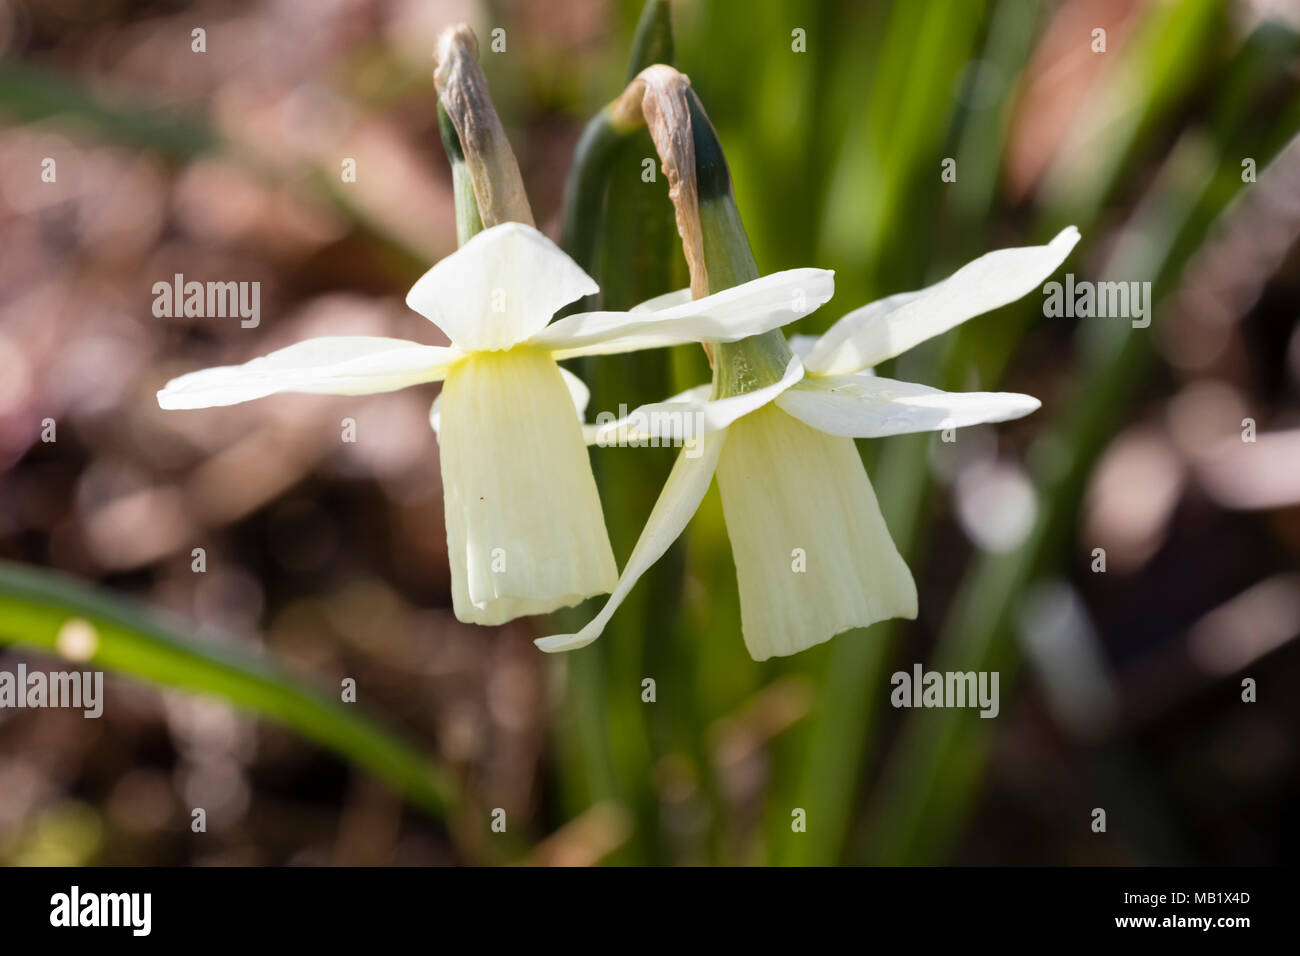 White trumpet flowers of the early spring blooming triandrus daffodil, Narcissus 'Ice Wings' Stock Photo